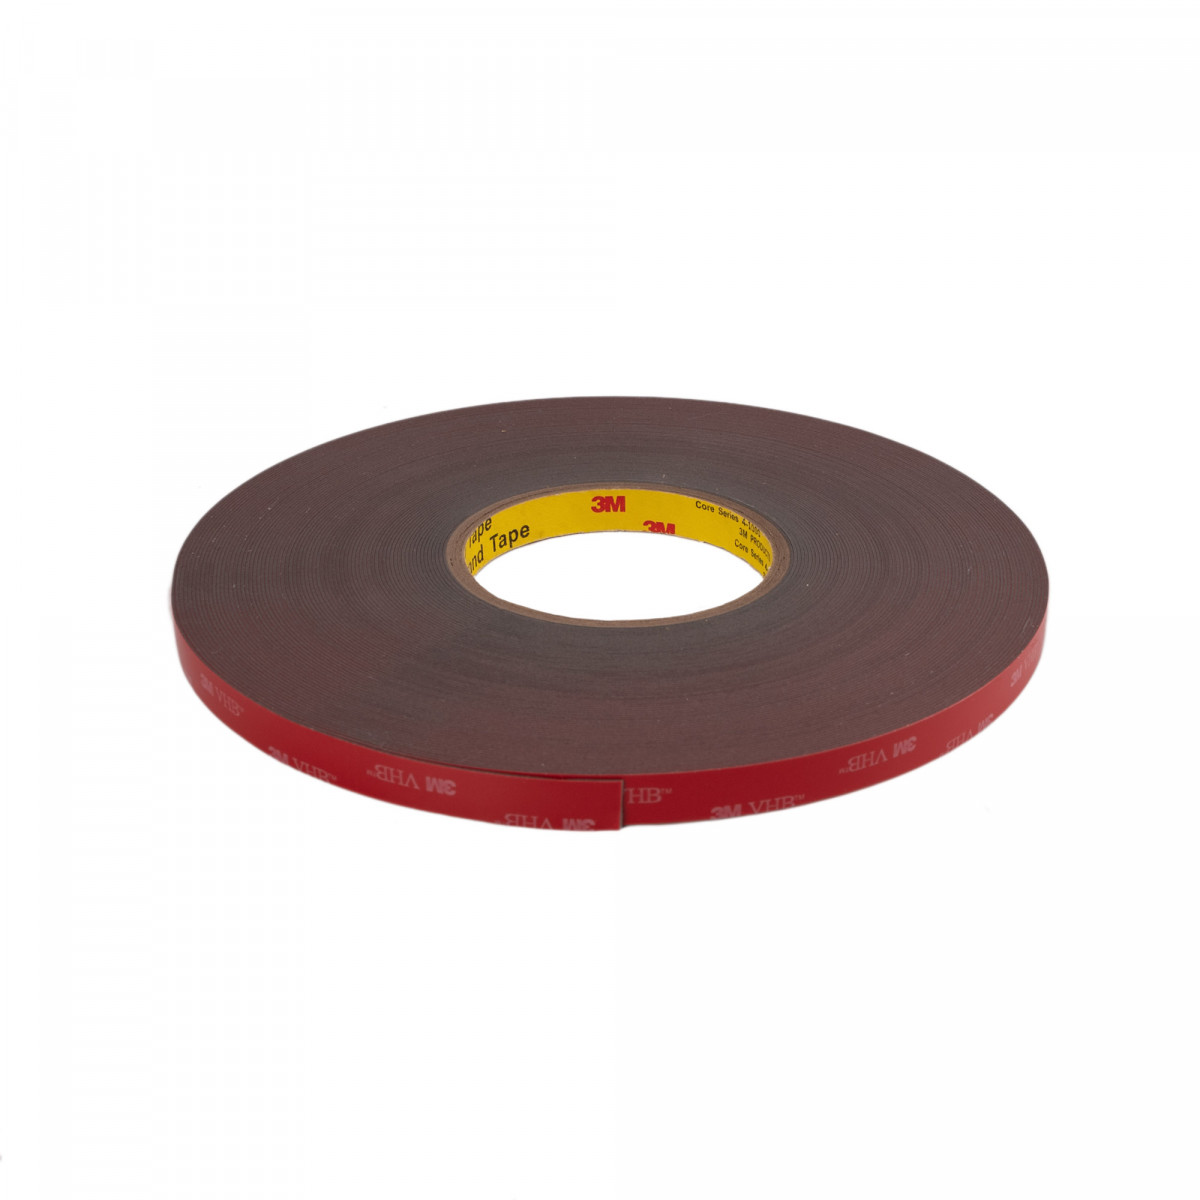 3M Adhesive Tape for 12mm LED Strip - Double sided - IP67- 33m